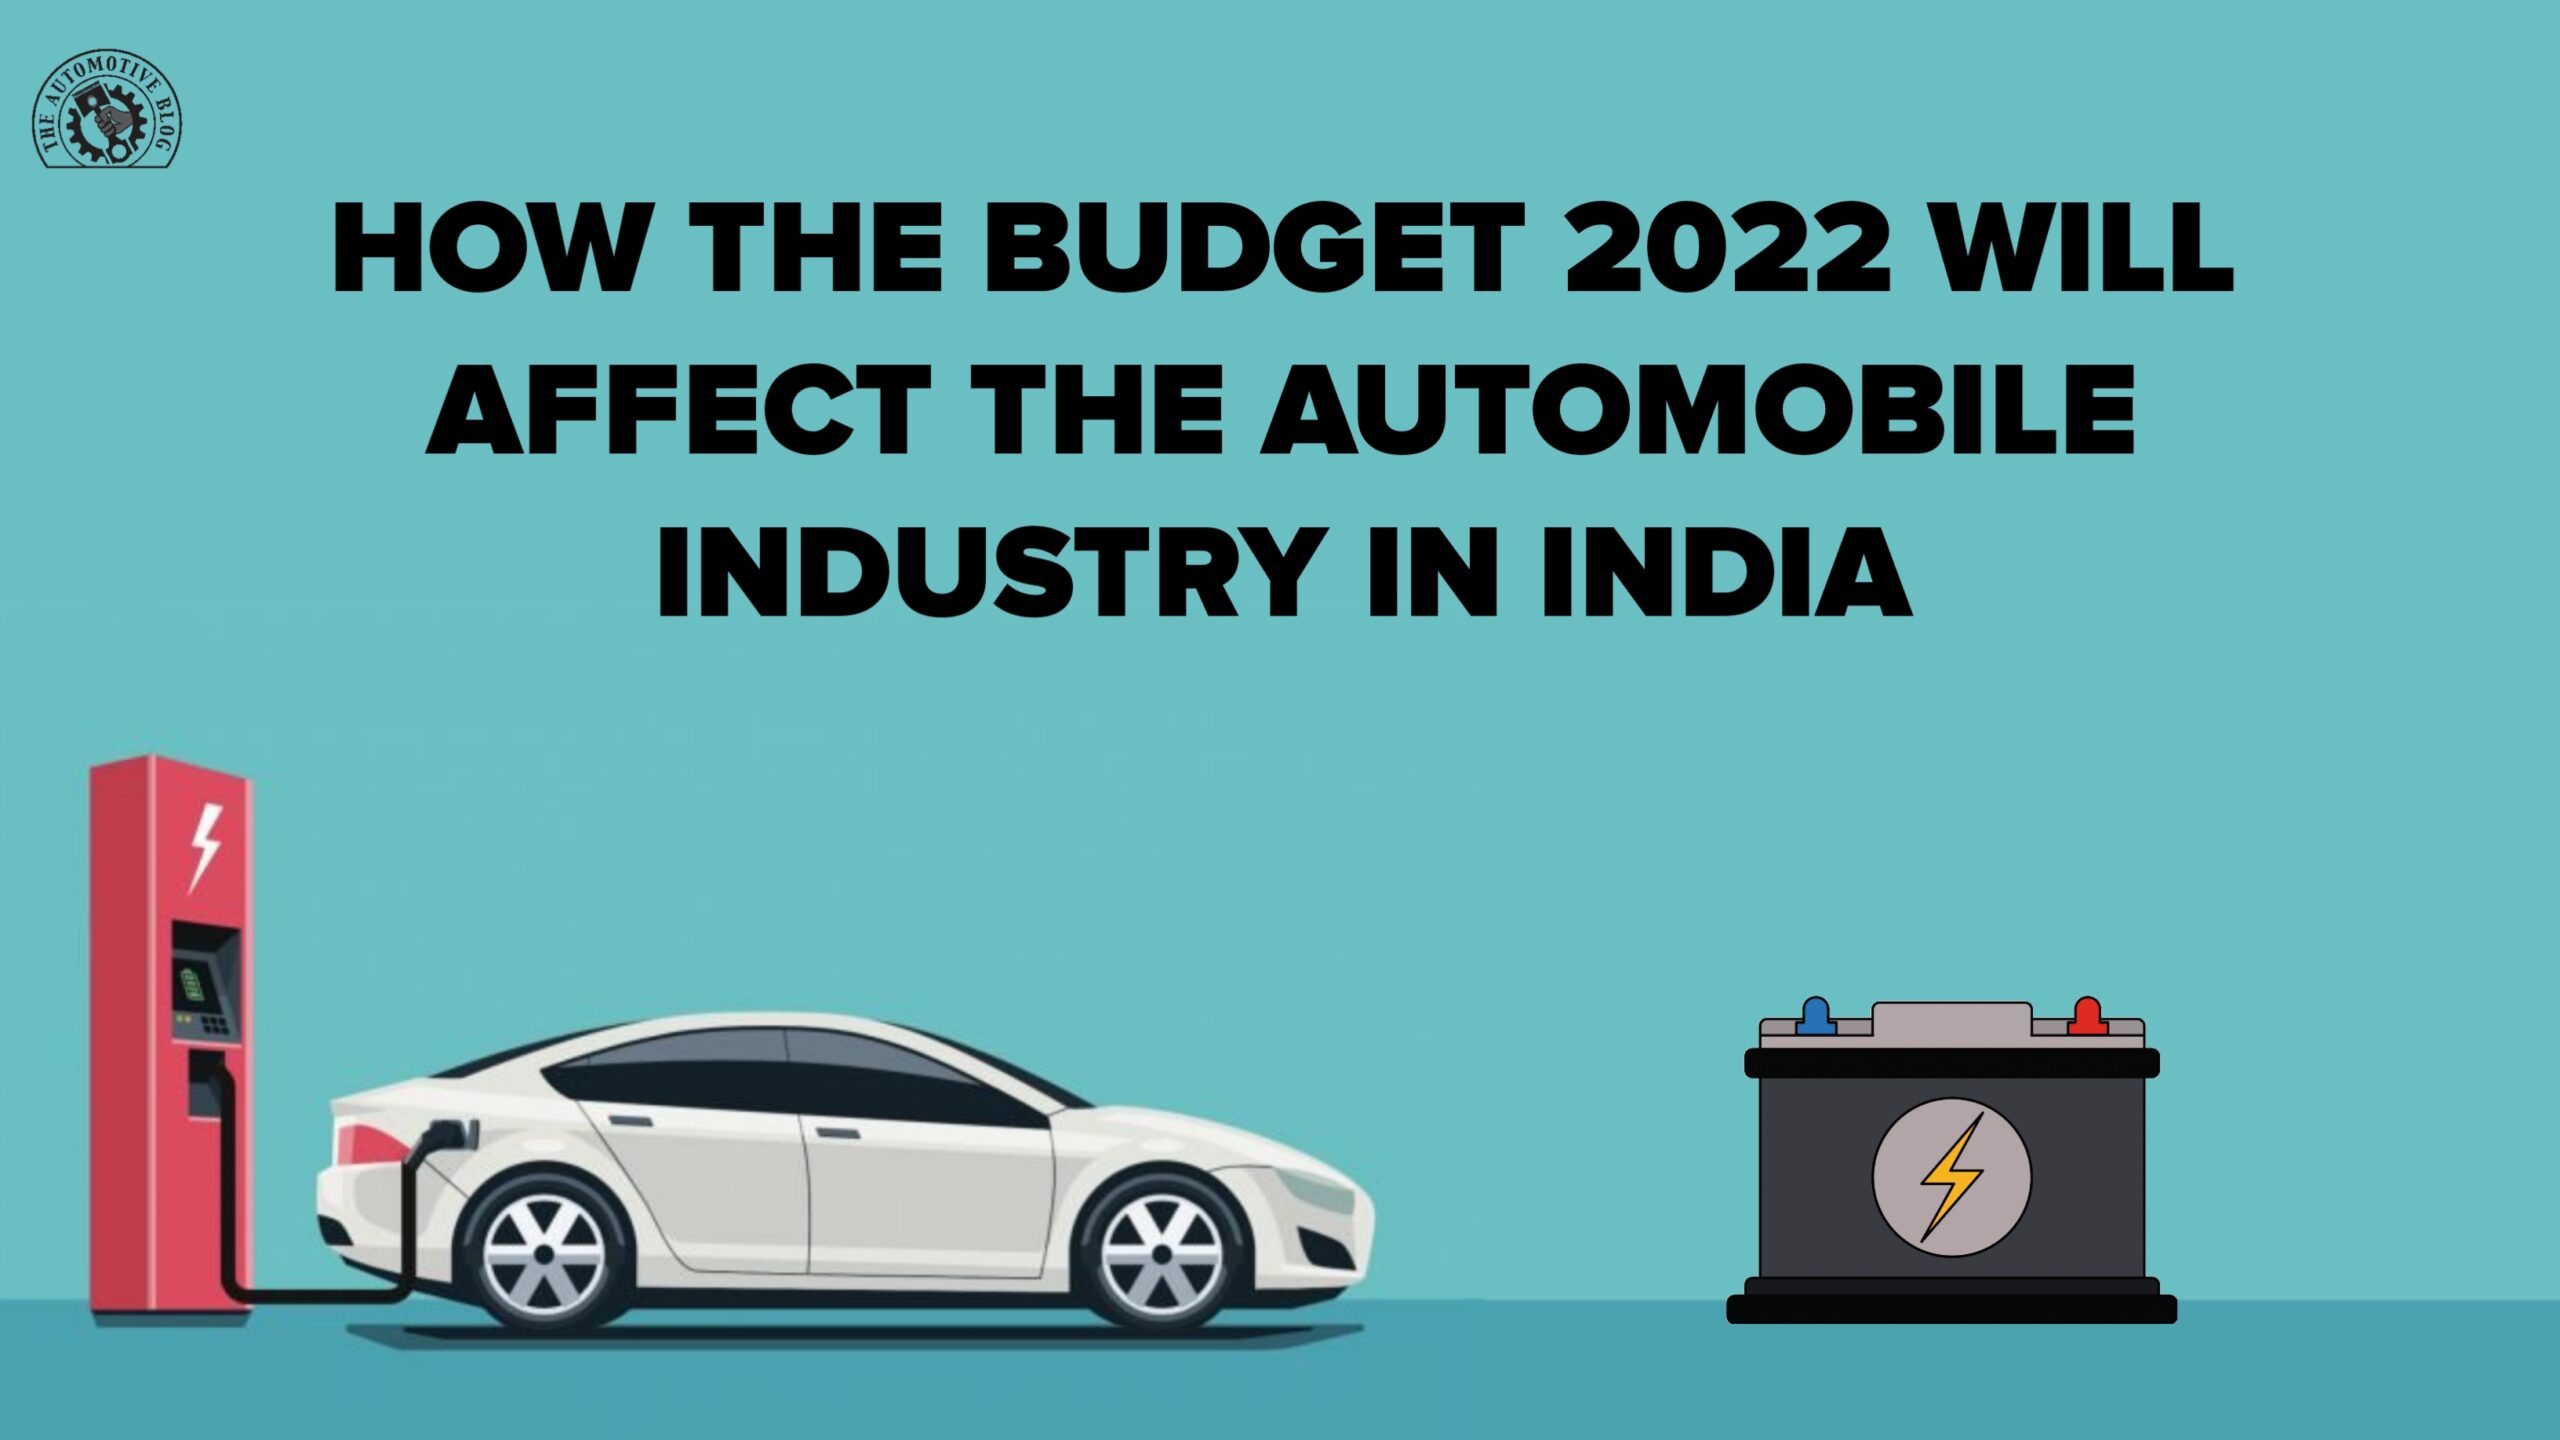 Here’s how the Budget 2022 will affect the Automobile Industry in India